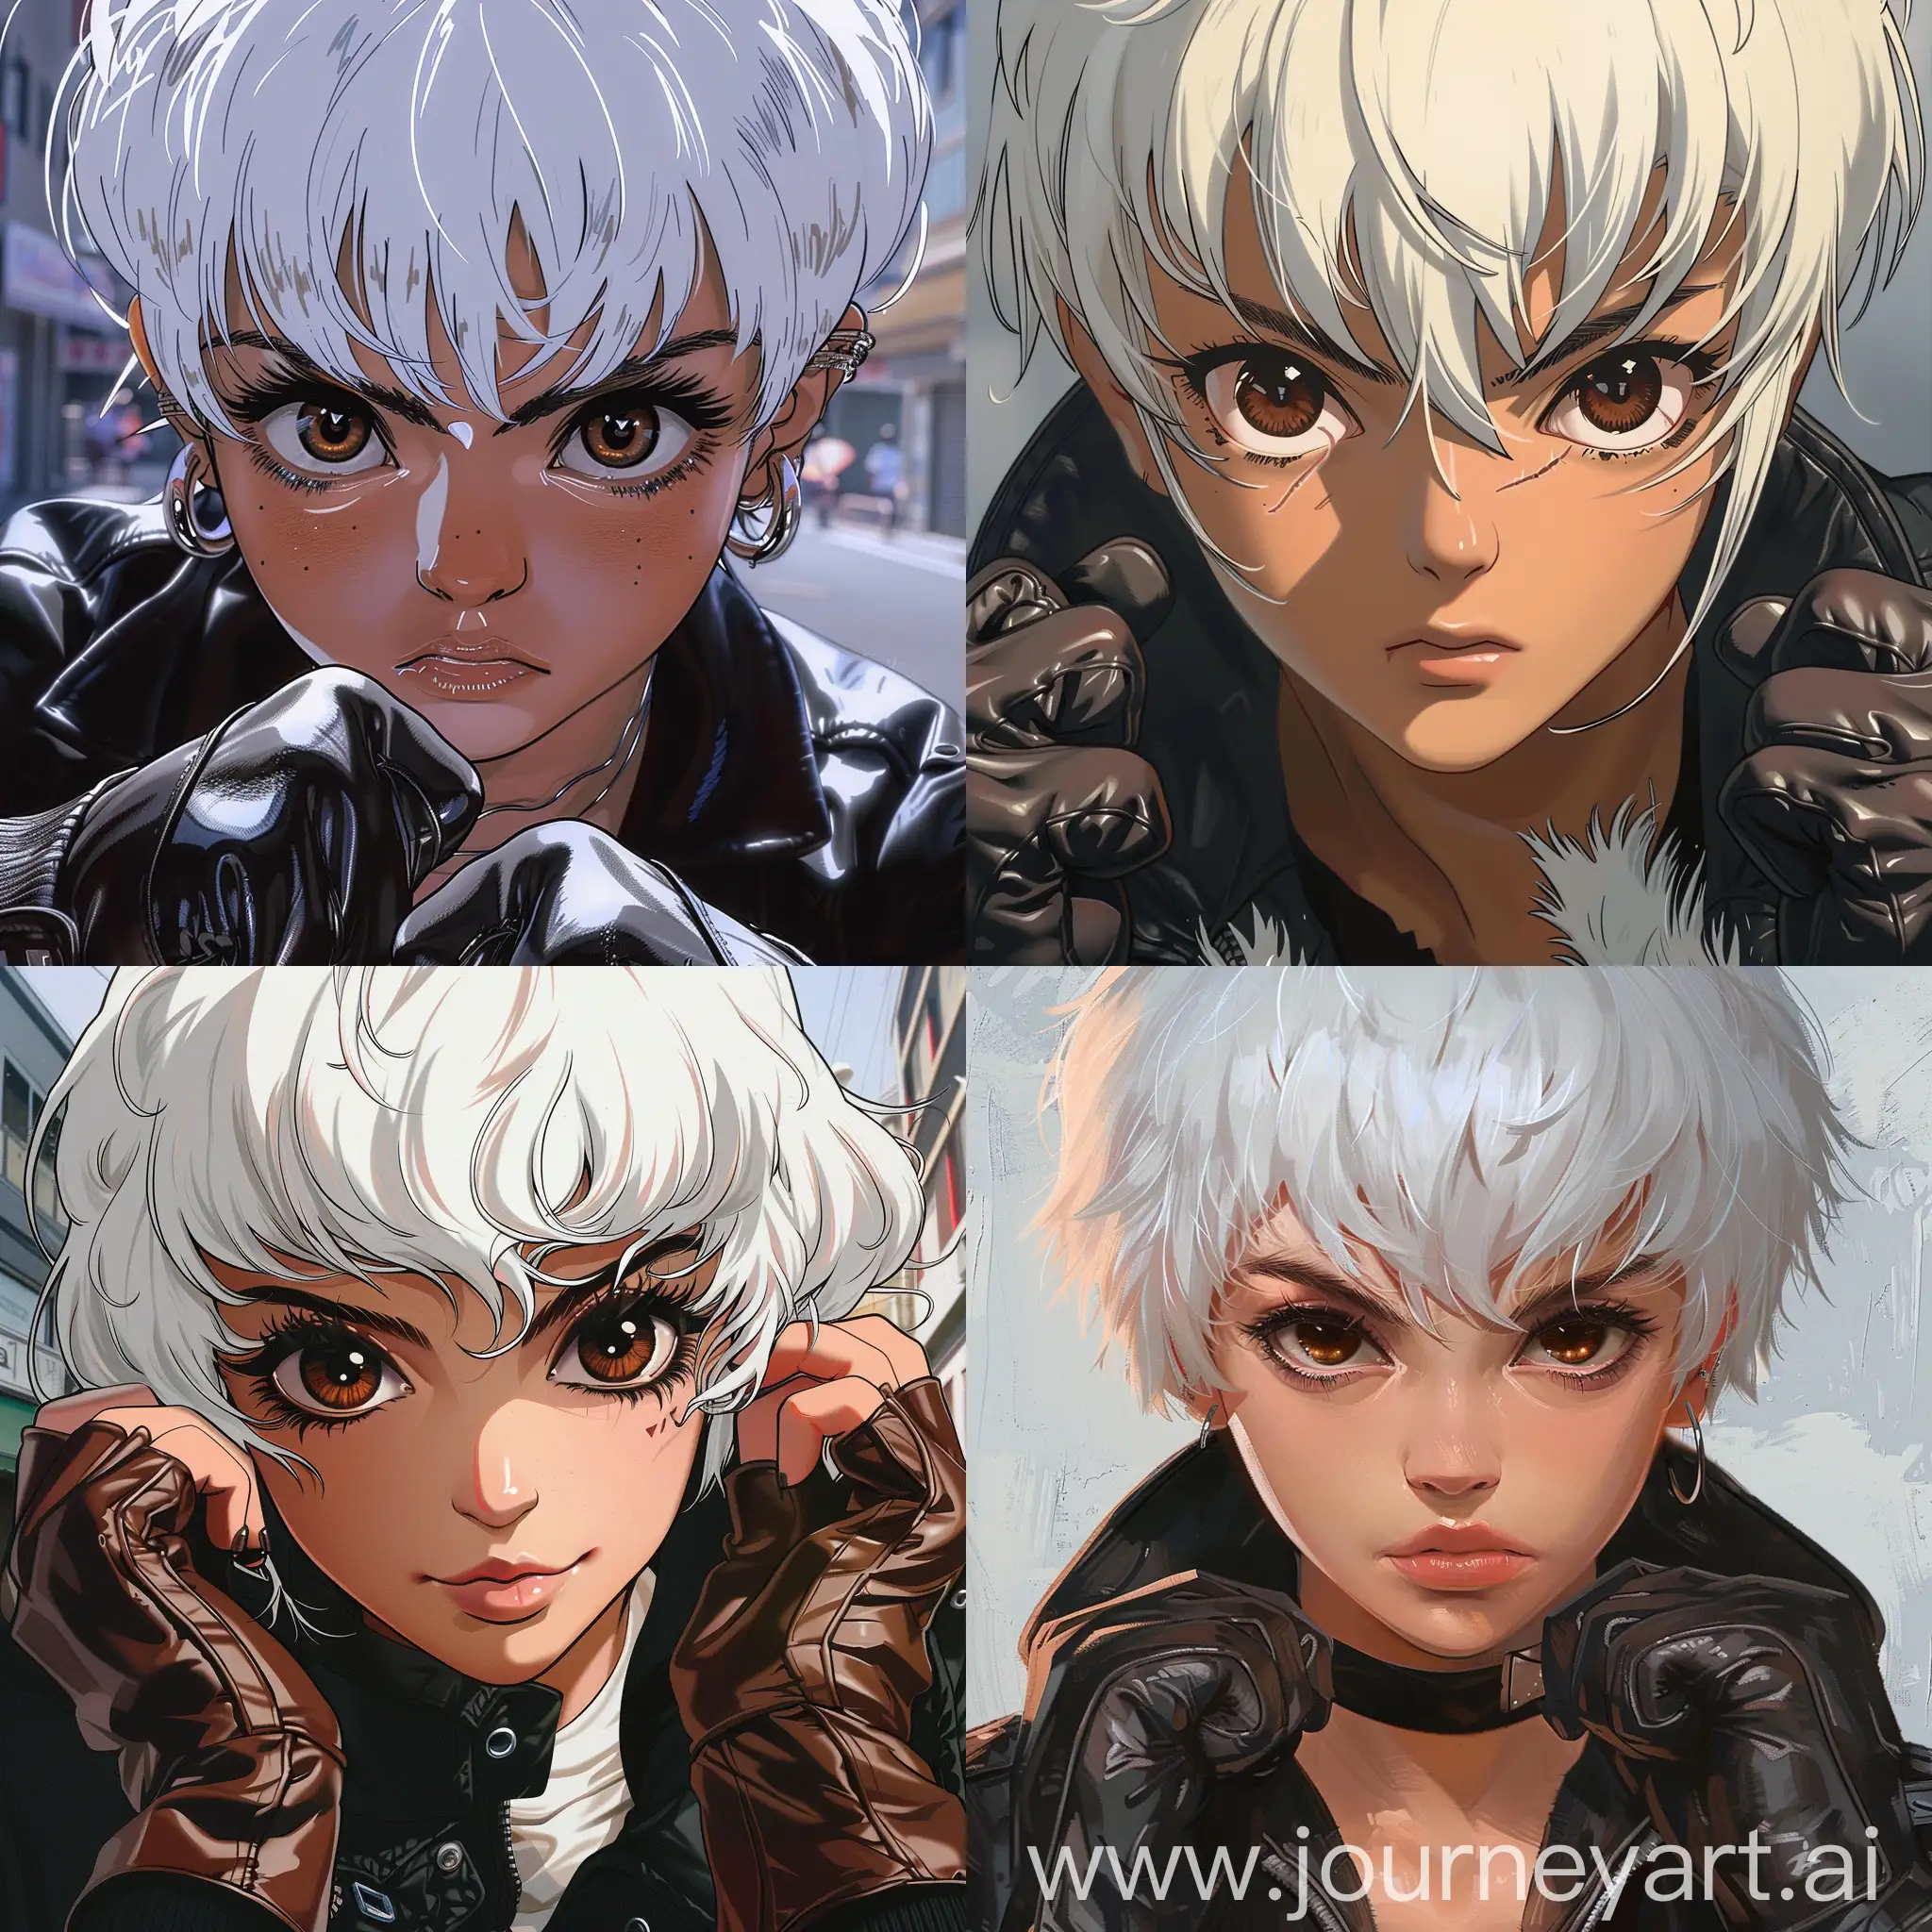 anime, fluffy short white hair, badass, beautiful young woman, cute, brown eyes, sharp eyes, leather gloves, thick eyebrows, black jacket, street, retro style, jujutsu kaisen, close up character design, concept design sheet, 90s anime style